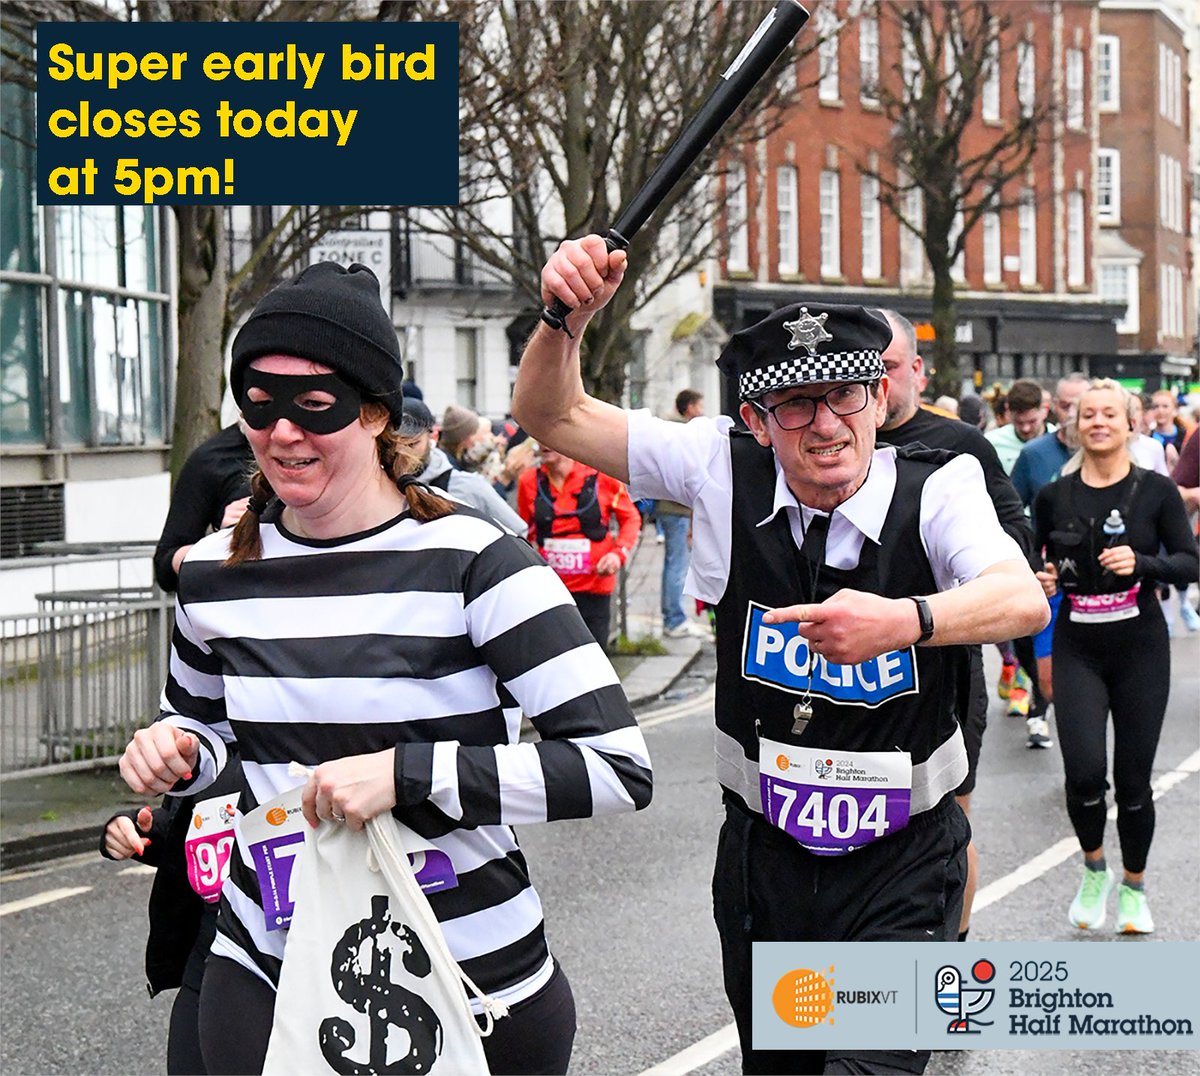 The super early bird offer to valued supporters of the Rubix VT Brighton Half Marathon closes at 5pm today! Have you got your entry for 2025? Enter here: brighton-half.eventize.co.uk/e/brighton-hal…